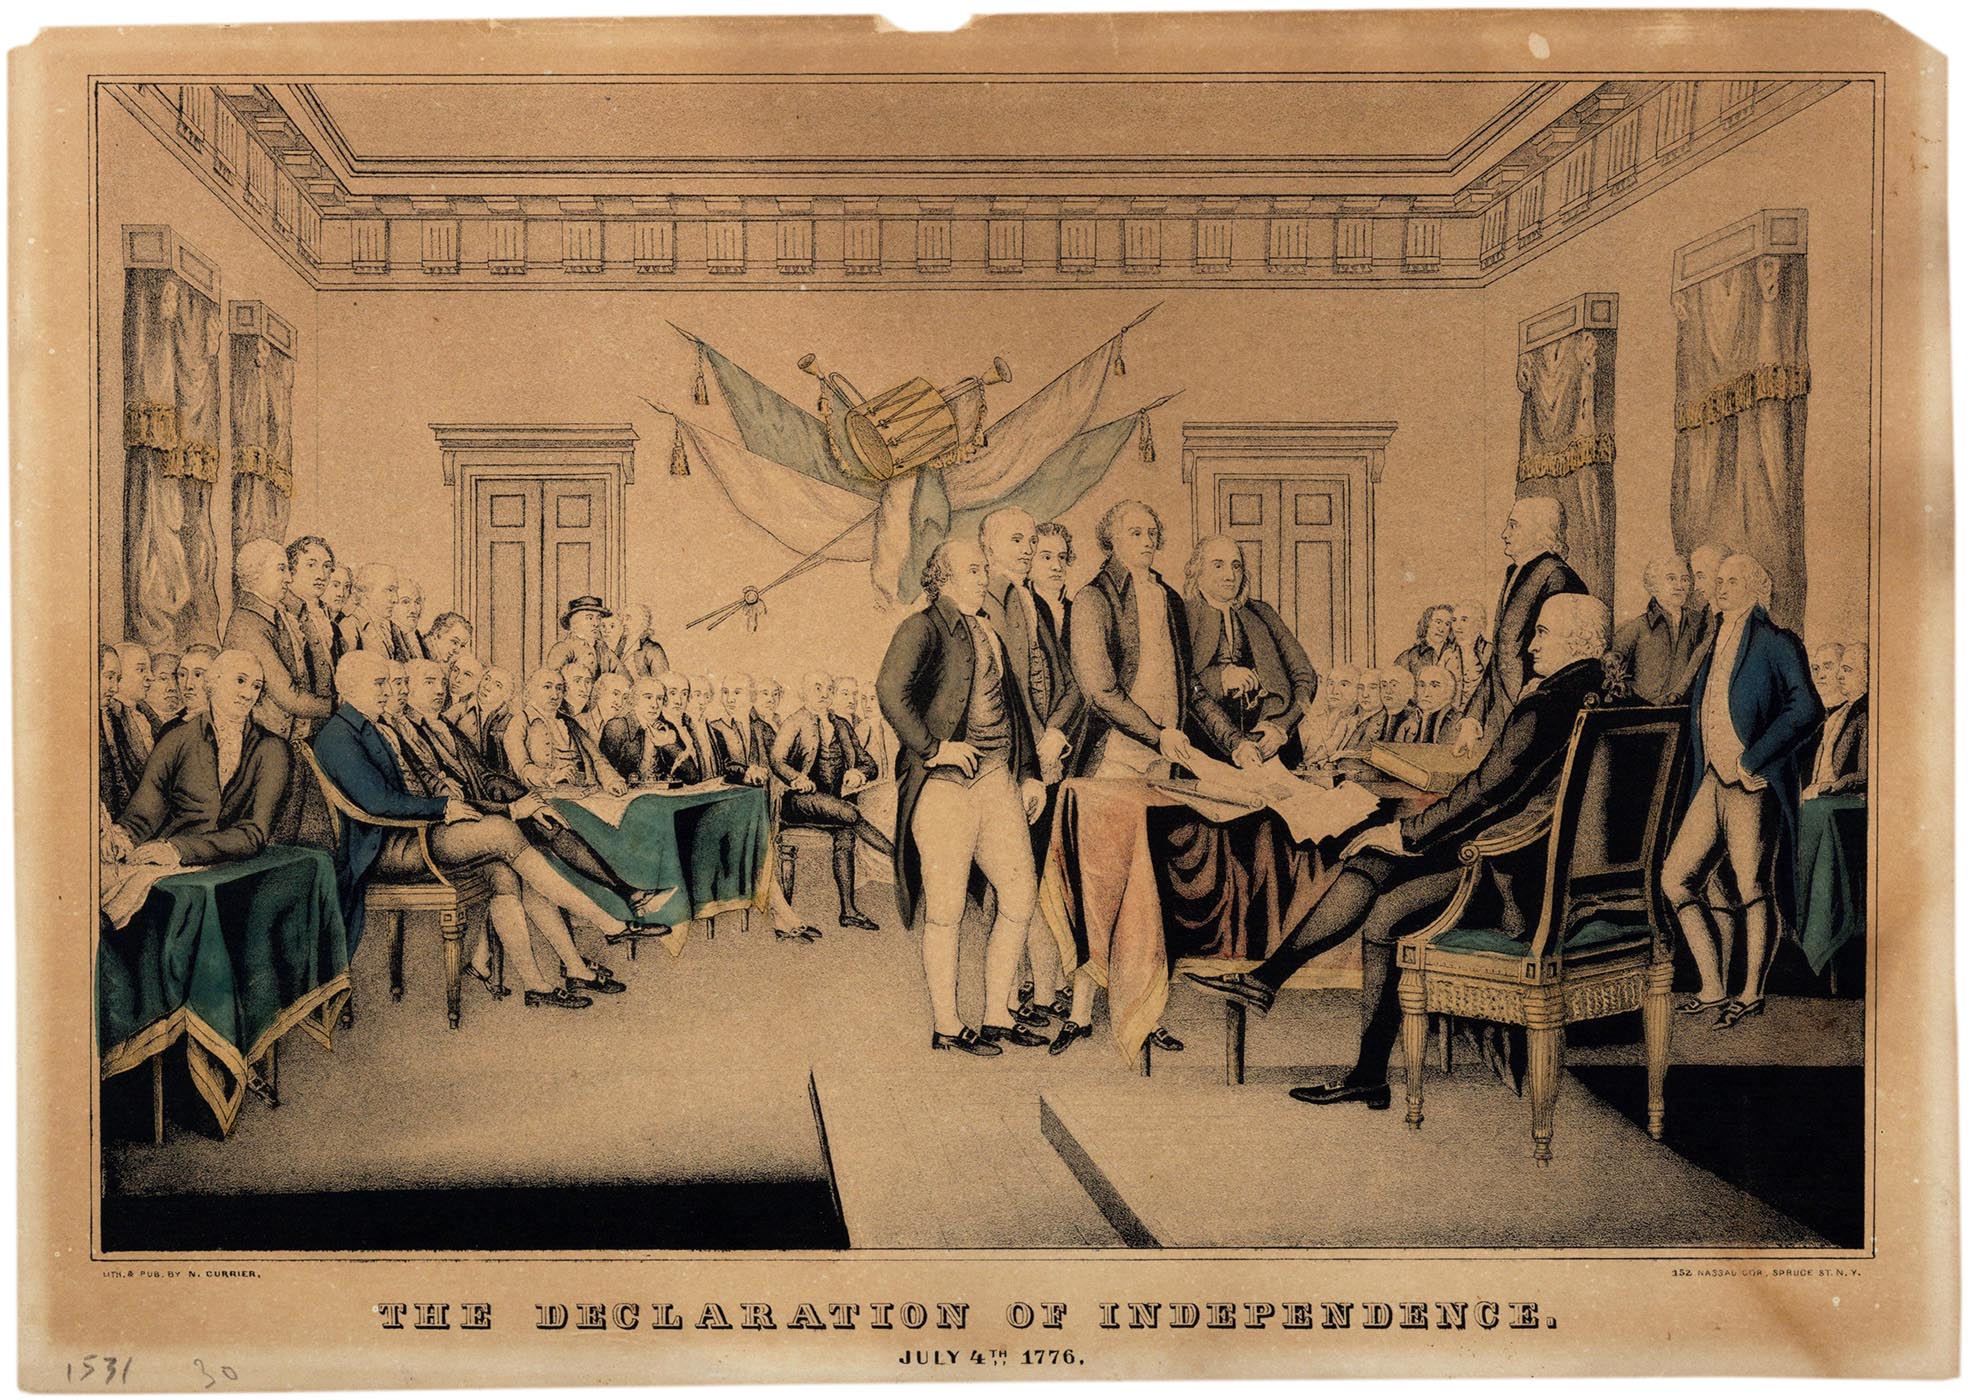 Nathaniel Currier, Presenting the Declaration of Independence, ca. 1850. (The Gilder Lehrman Institute, GLC10045)